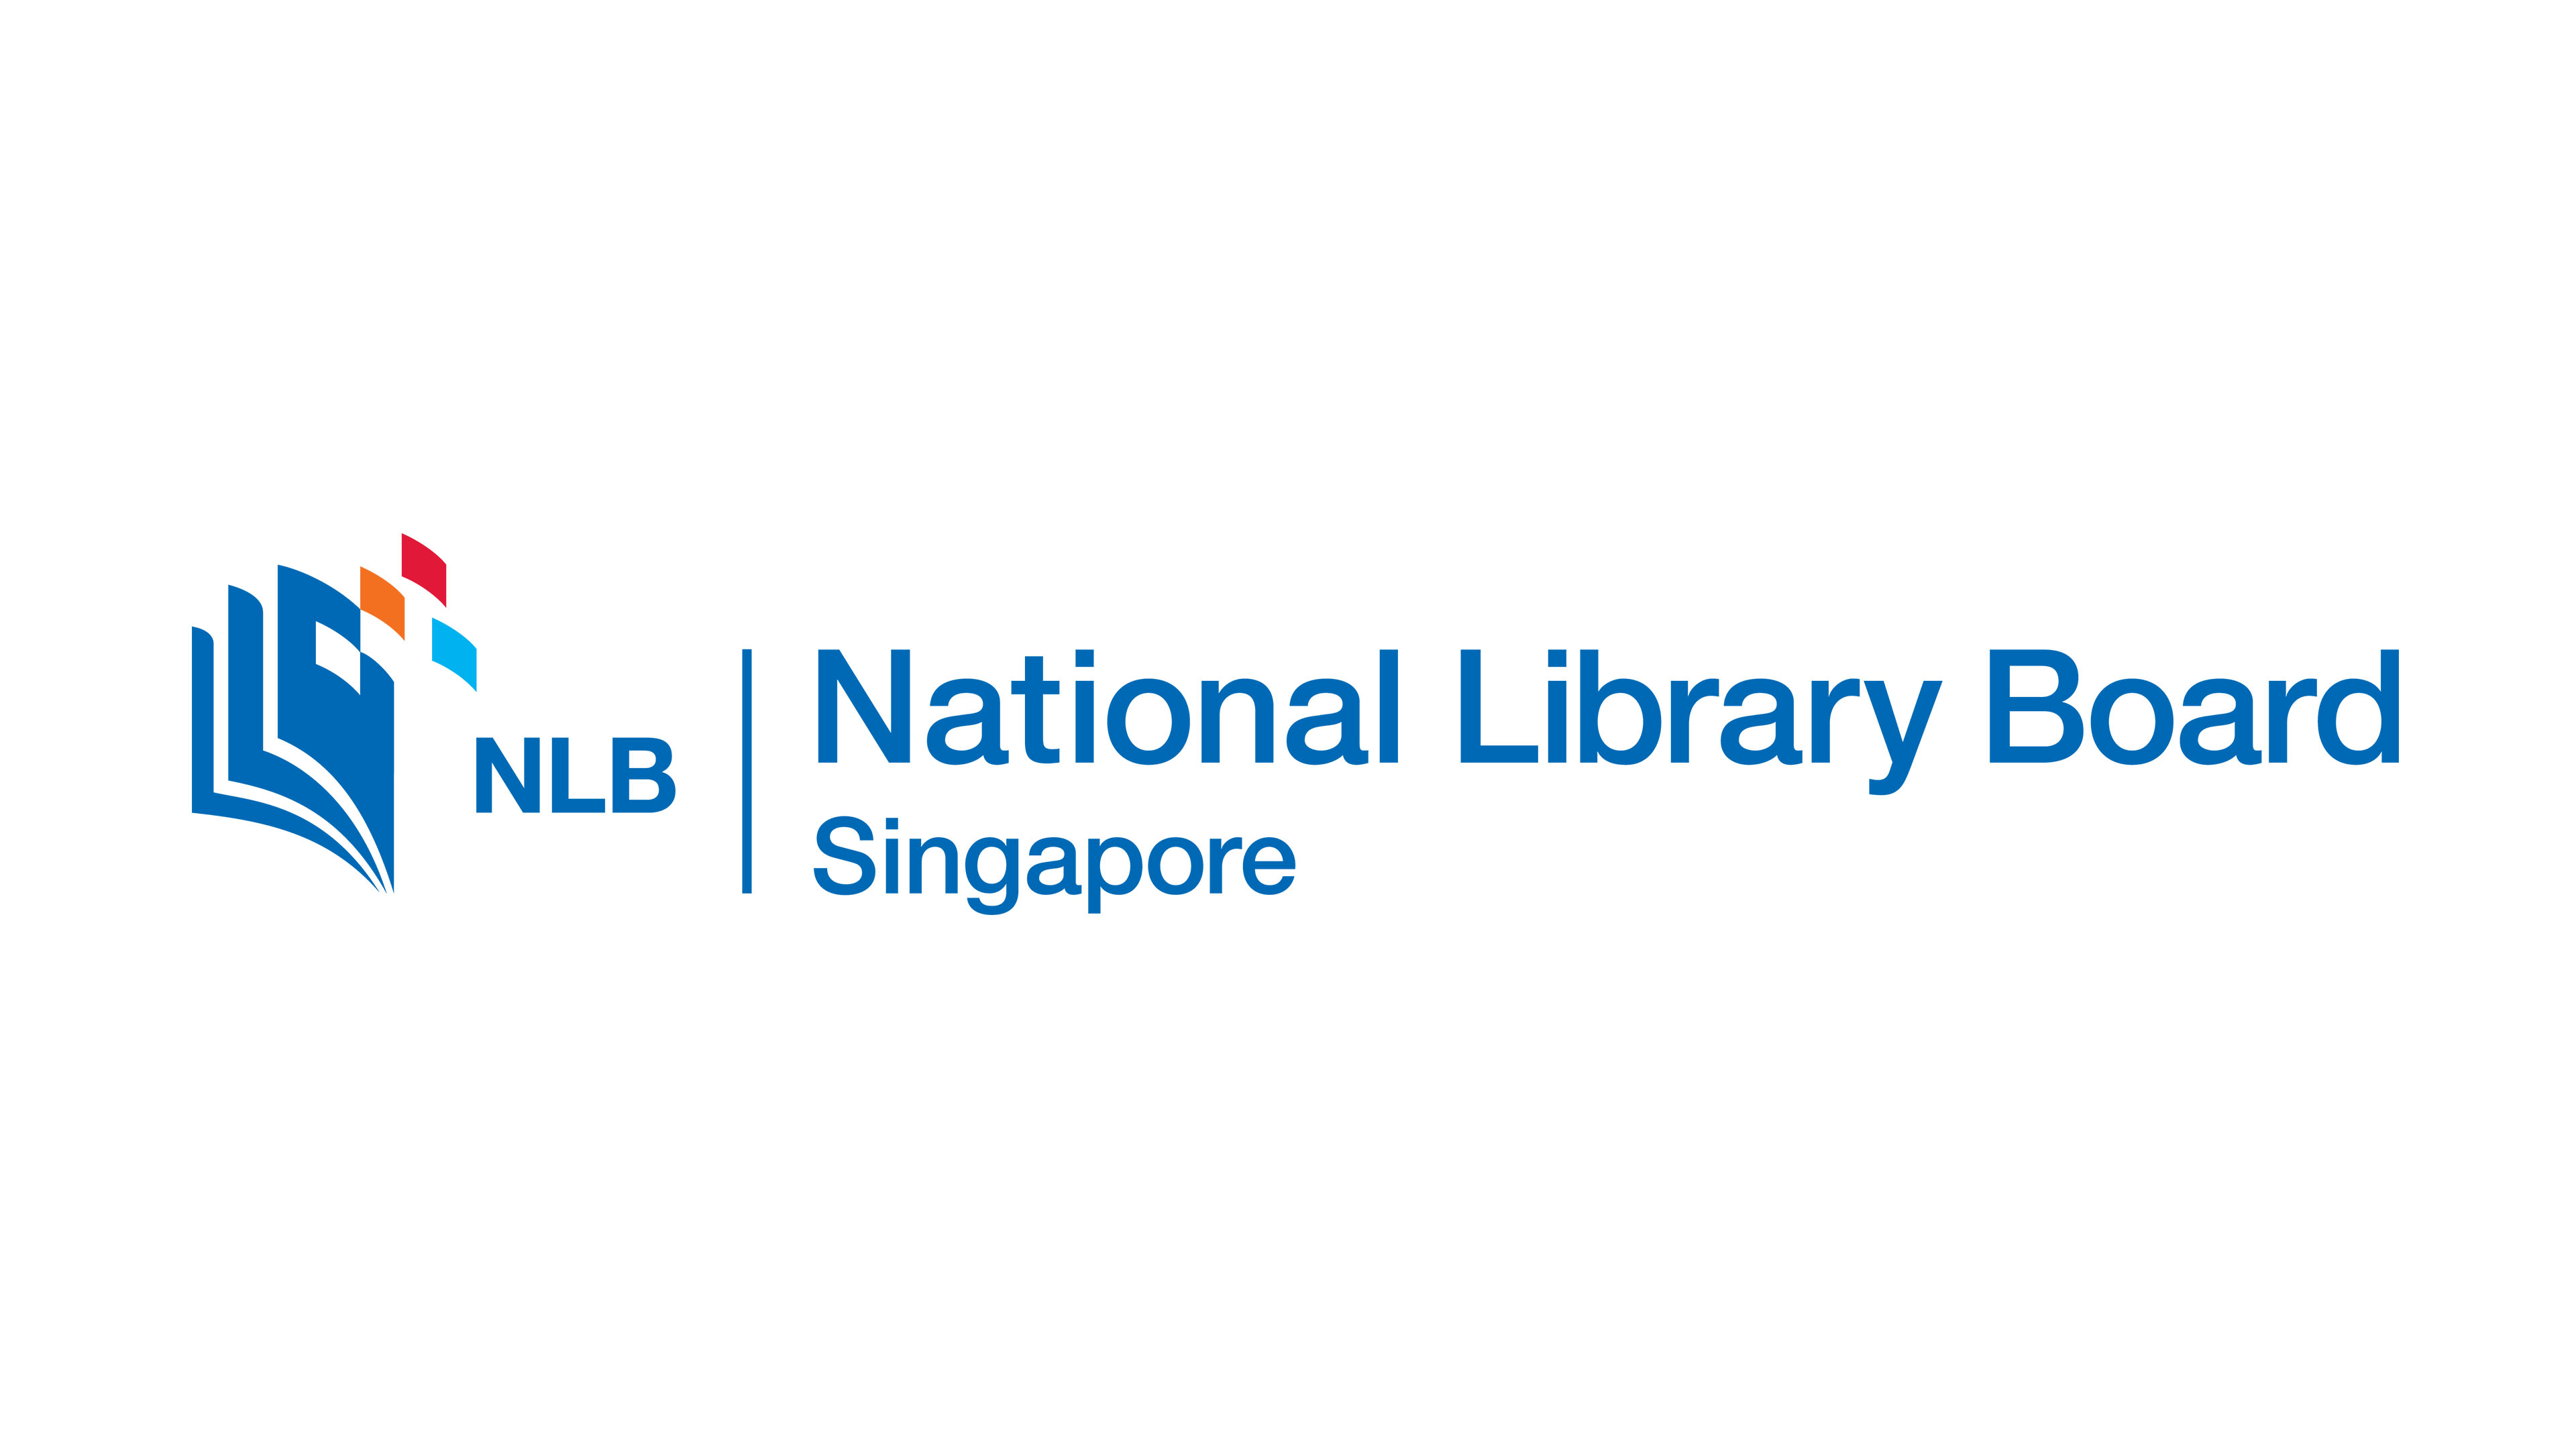 National Library Board Singapore logo